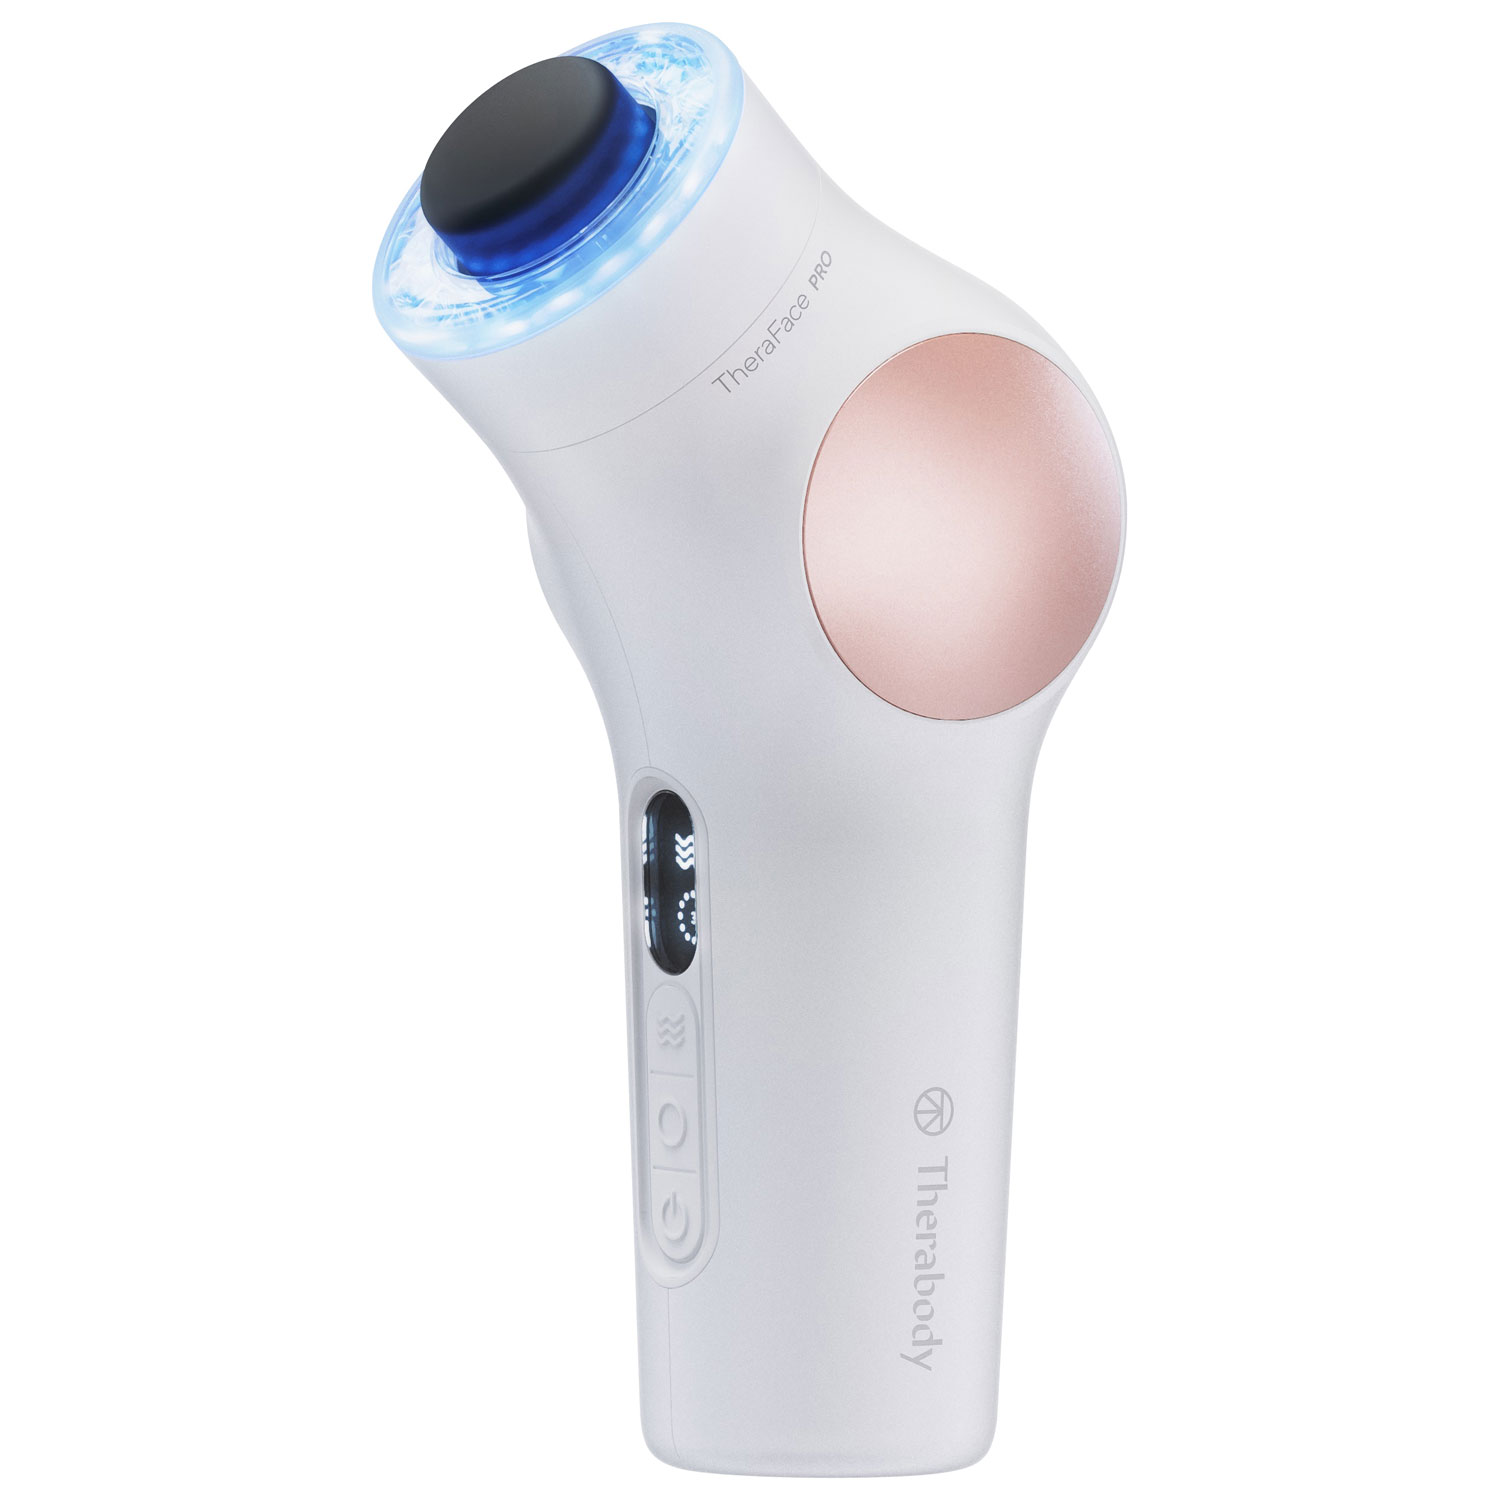 Theragun TheraFace Pro Percussive Skin Care & Cleansing Device - White